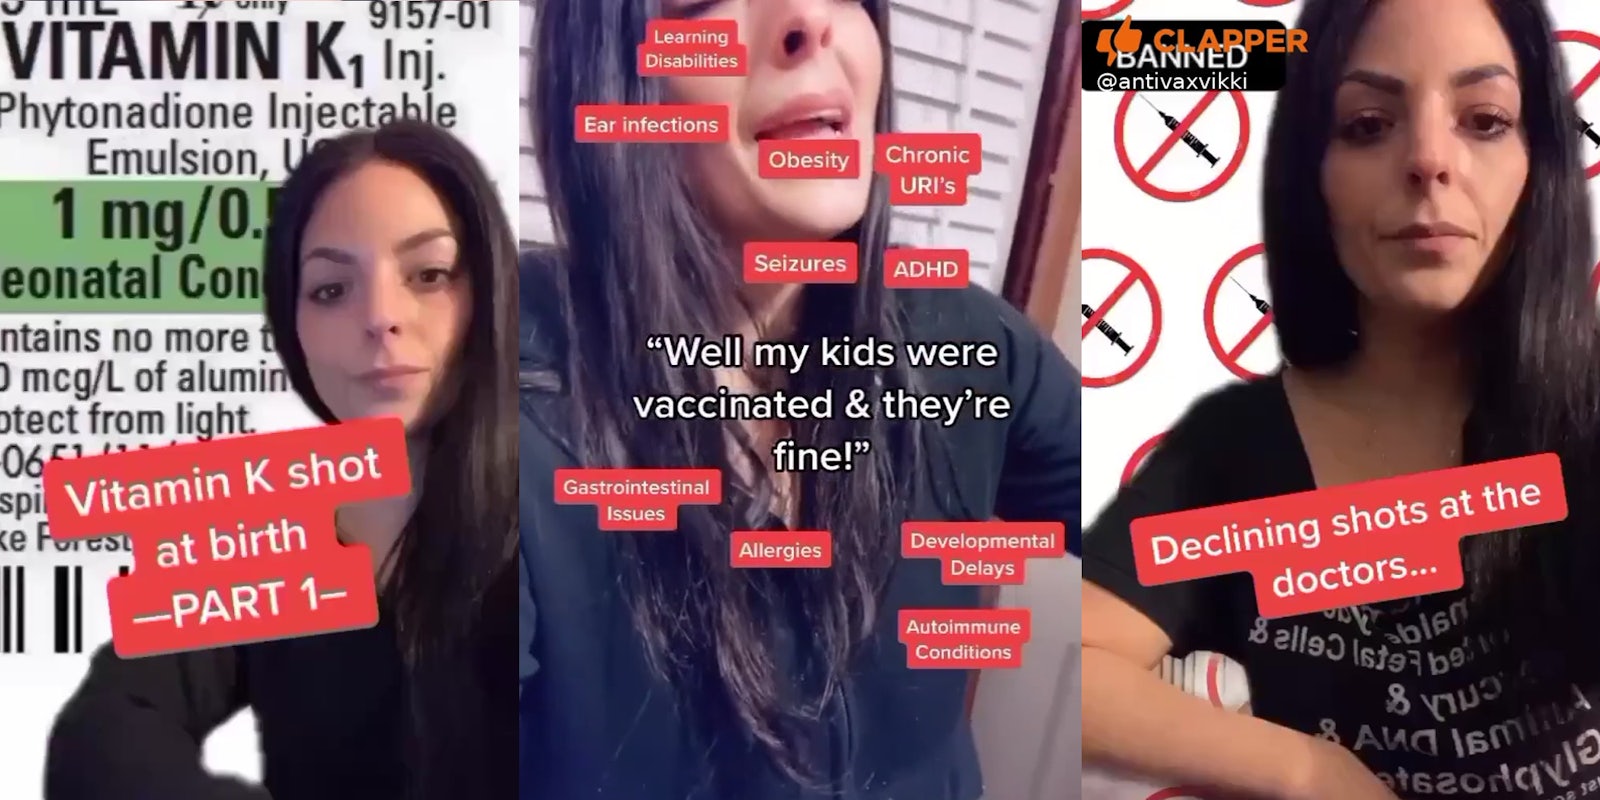 woman posting antivax video with titles 'Vitamin K shot at birth Part 1', 'Well my kids were vaccinated & they're fine!' and 'Declining shots at the doctors...'